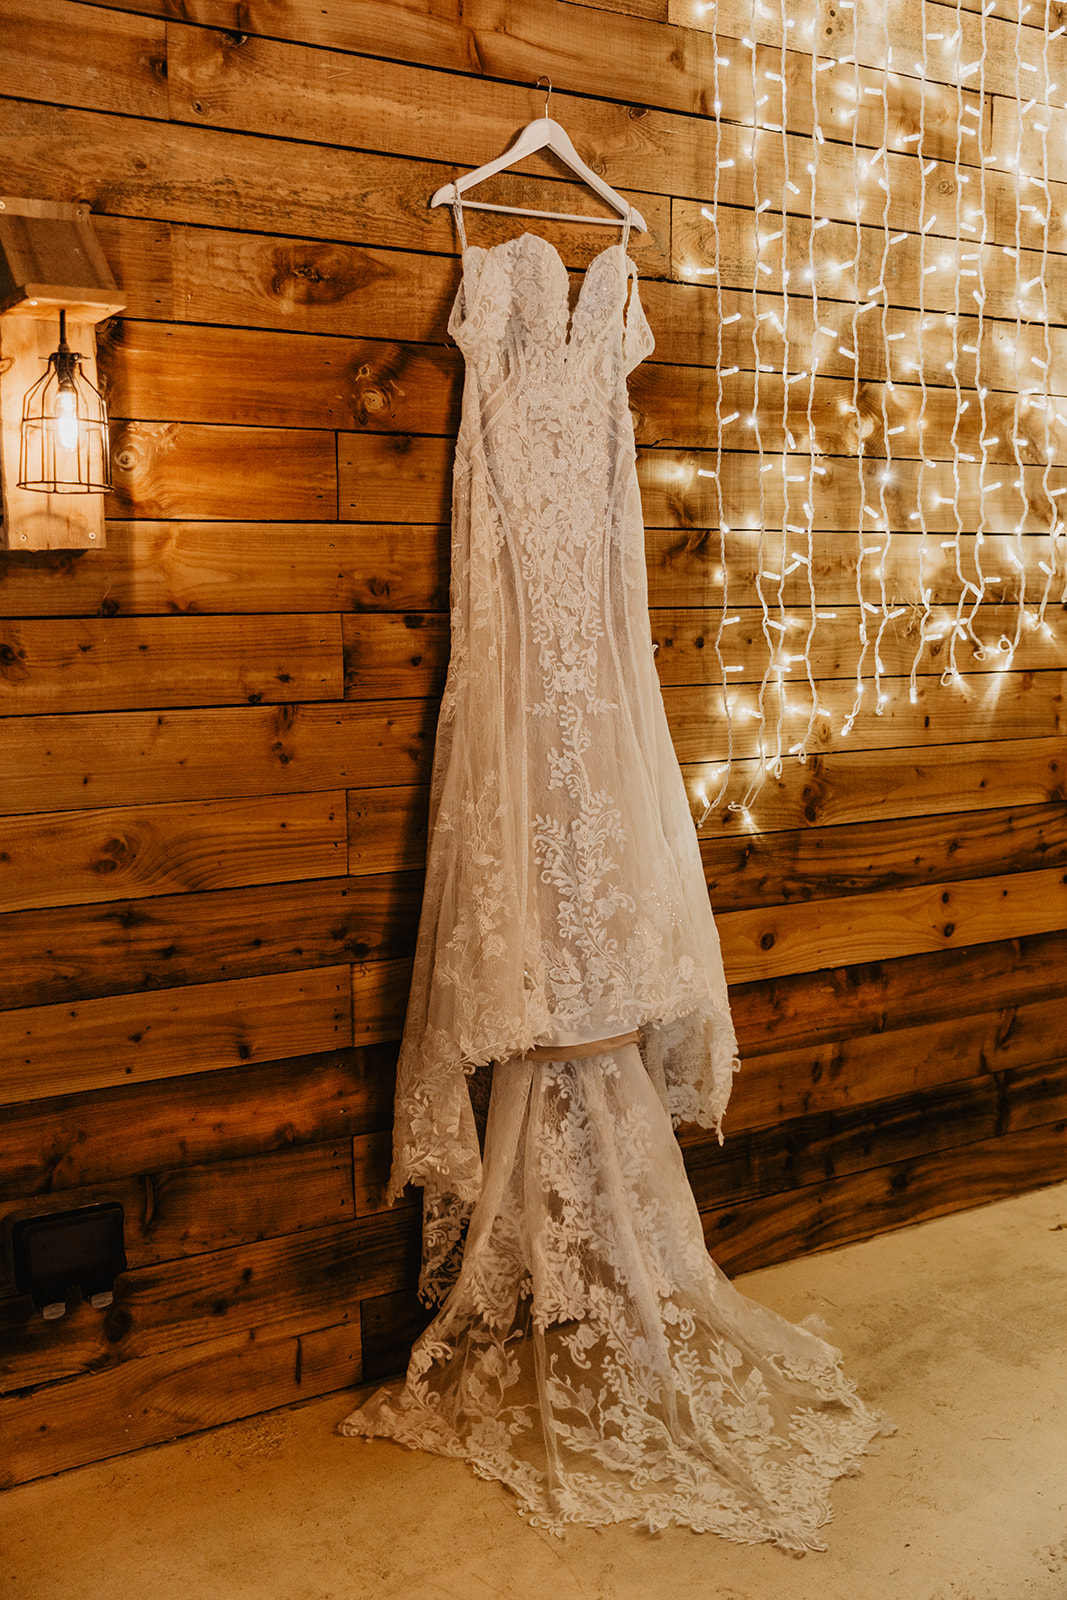 Bride's wedding dress at a Southlands barn wedding, Sussex. Photo by OliveJoy Photography.